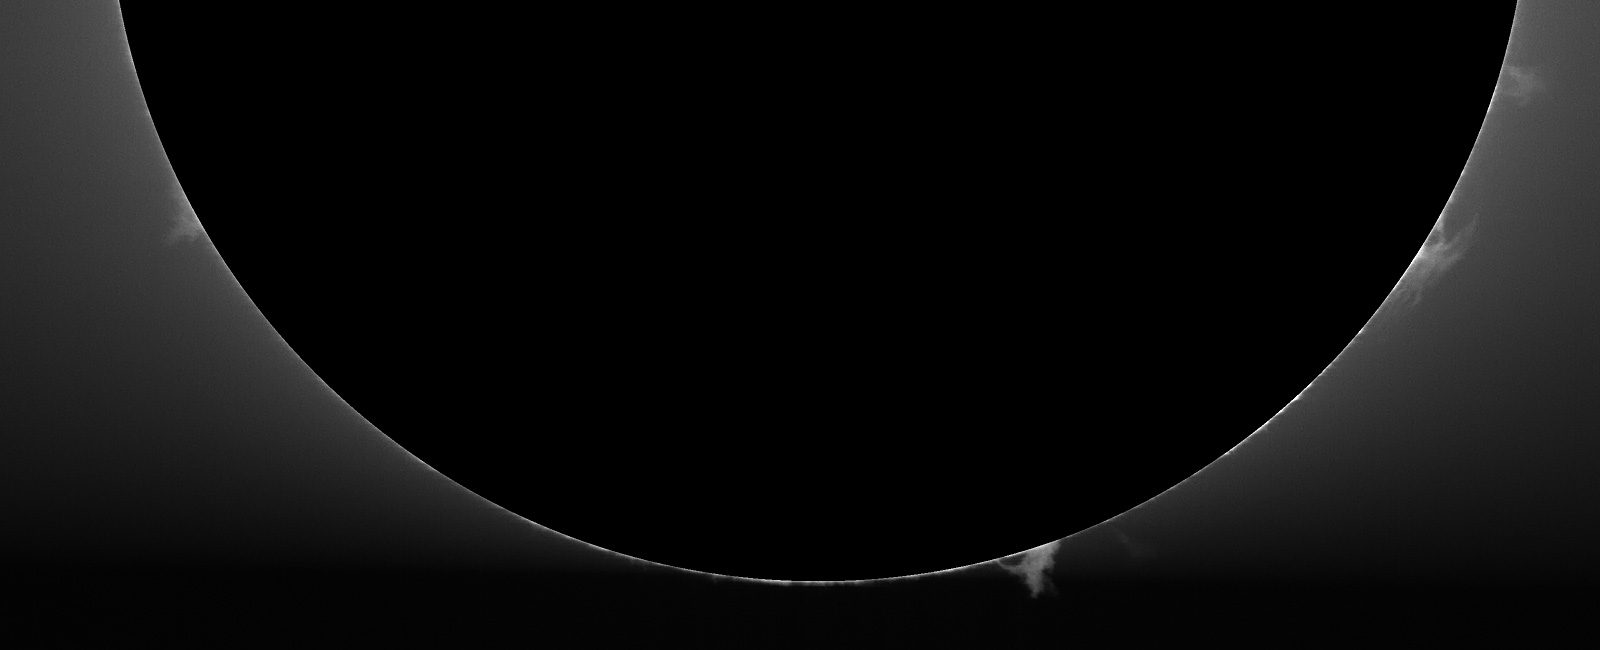 CaK prominence image